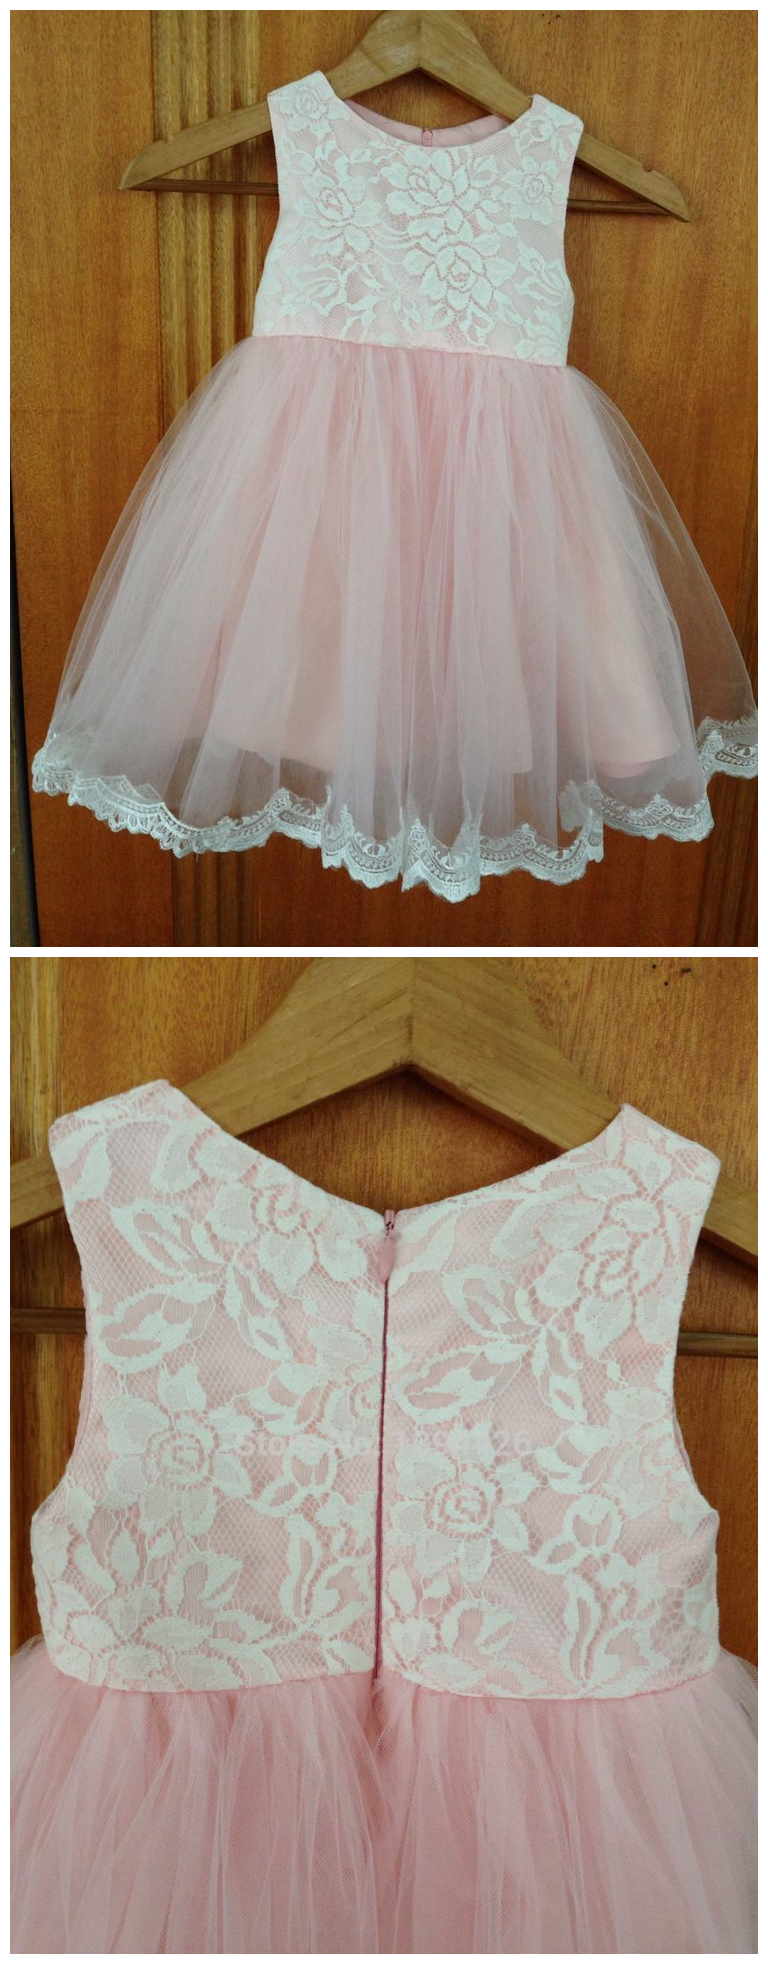 Pink Puffy Skirt Flower Girls Dresses At Wedding Party/girls Light Pink Dress For Party